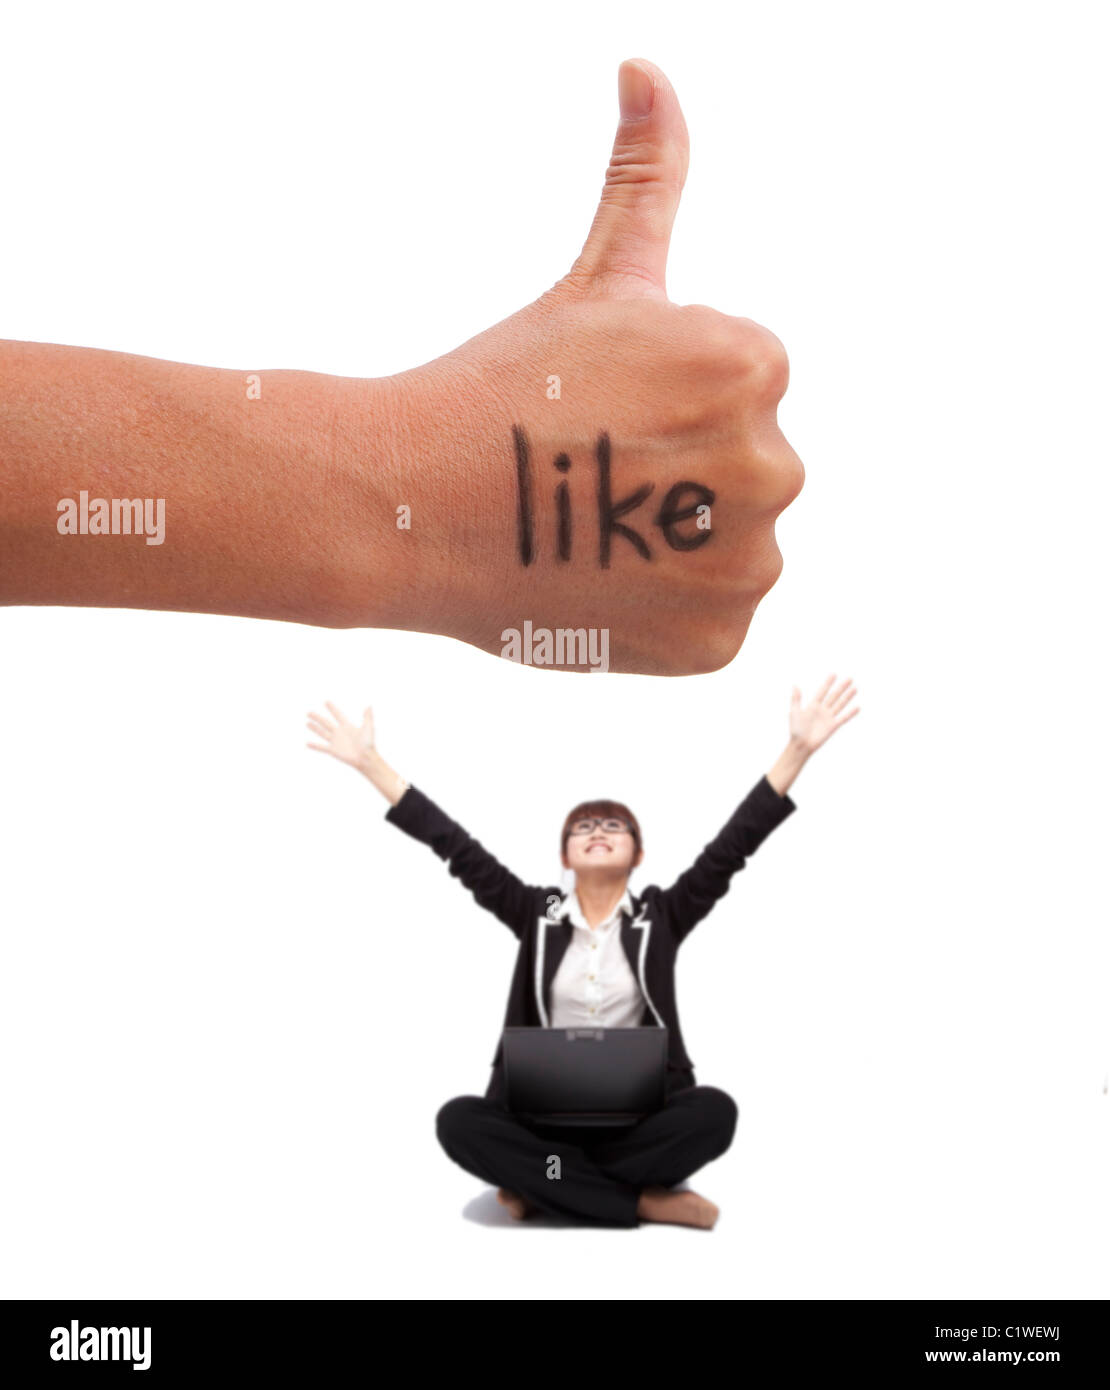 Thumb up with like mark. young woman enjoy social network on the internet Stock Photo